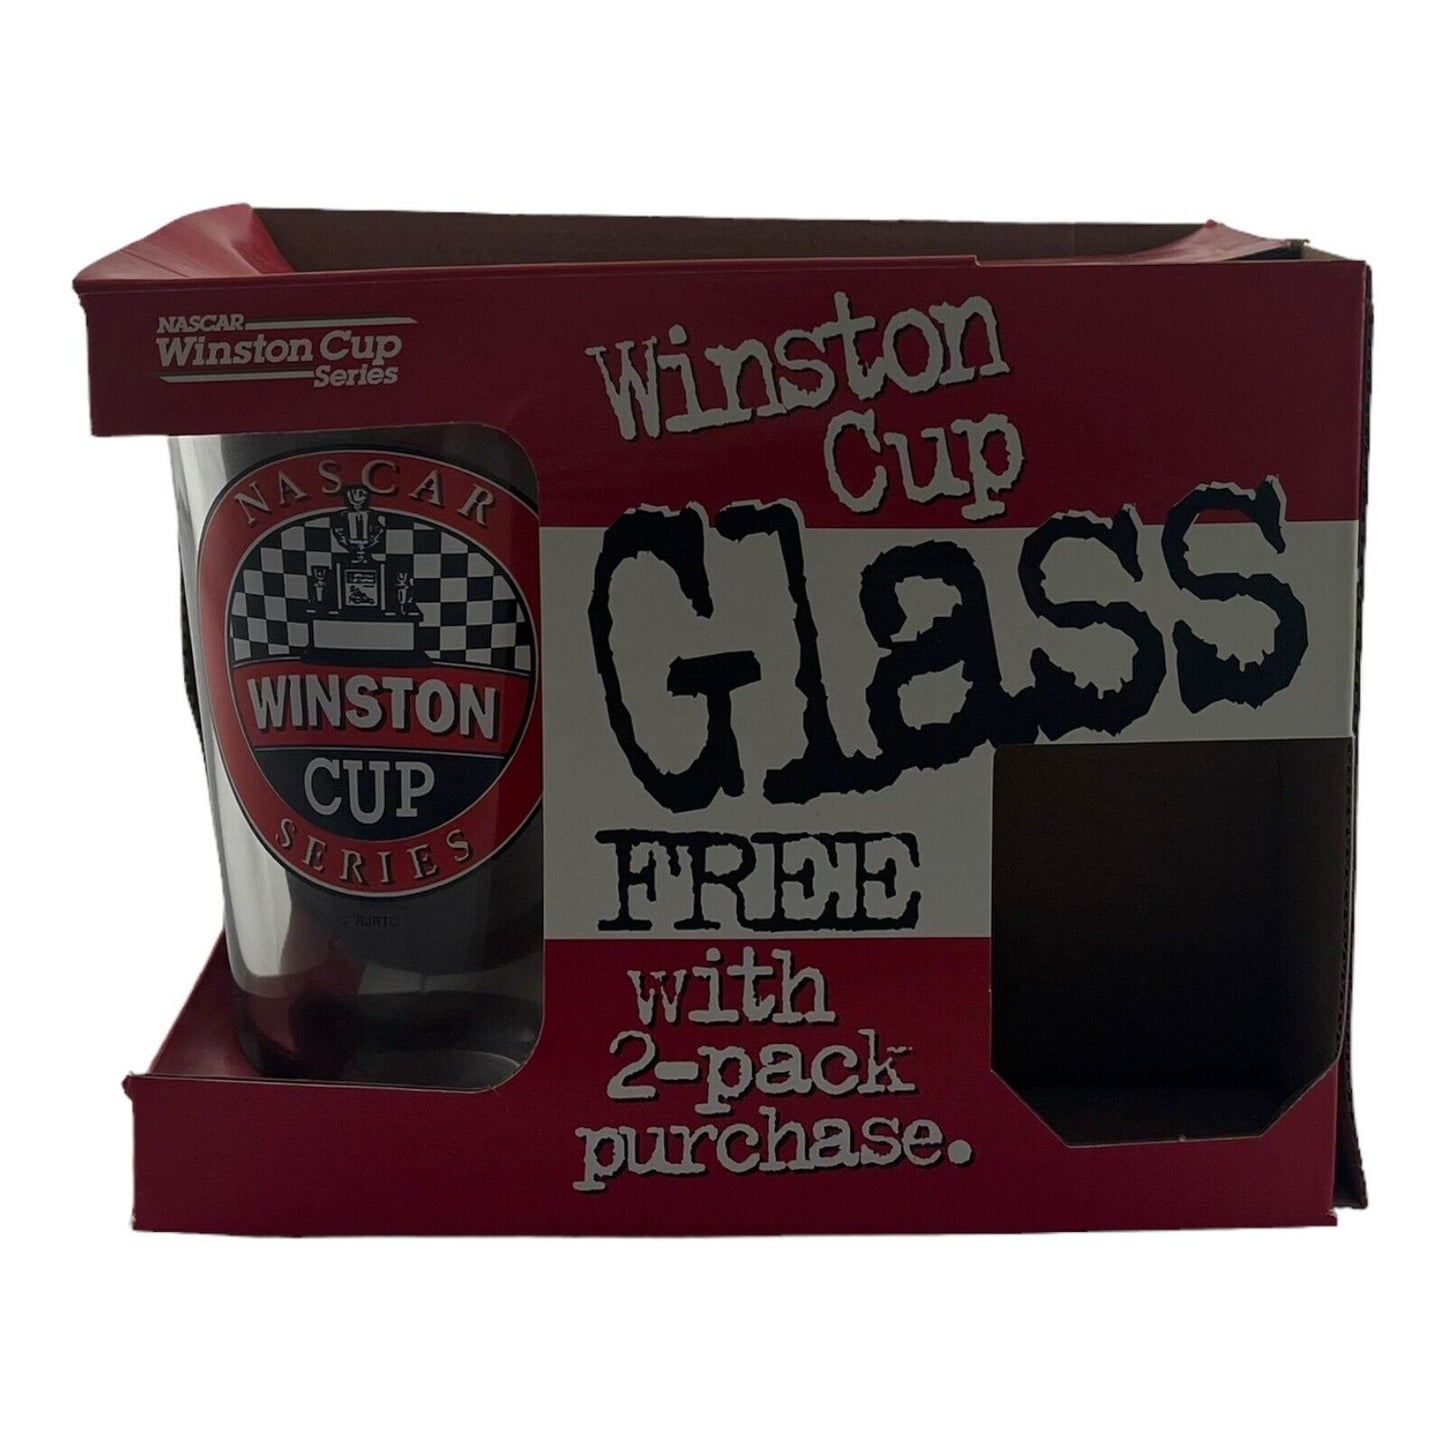 Nascar Winston Cup Series Pint Glass New in Package